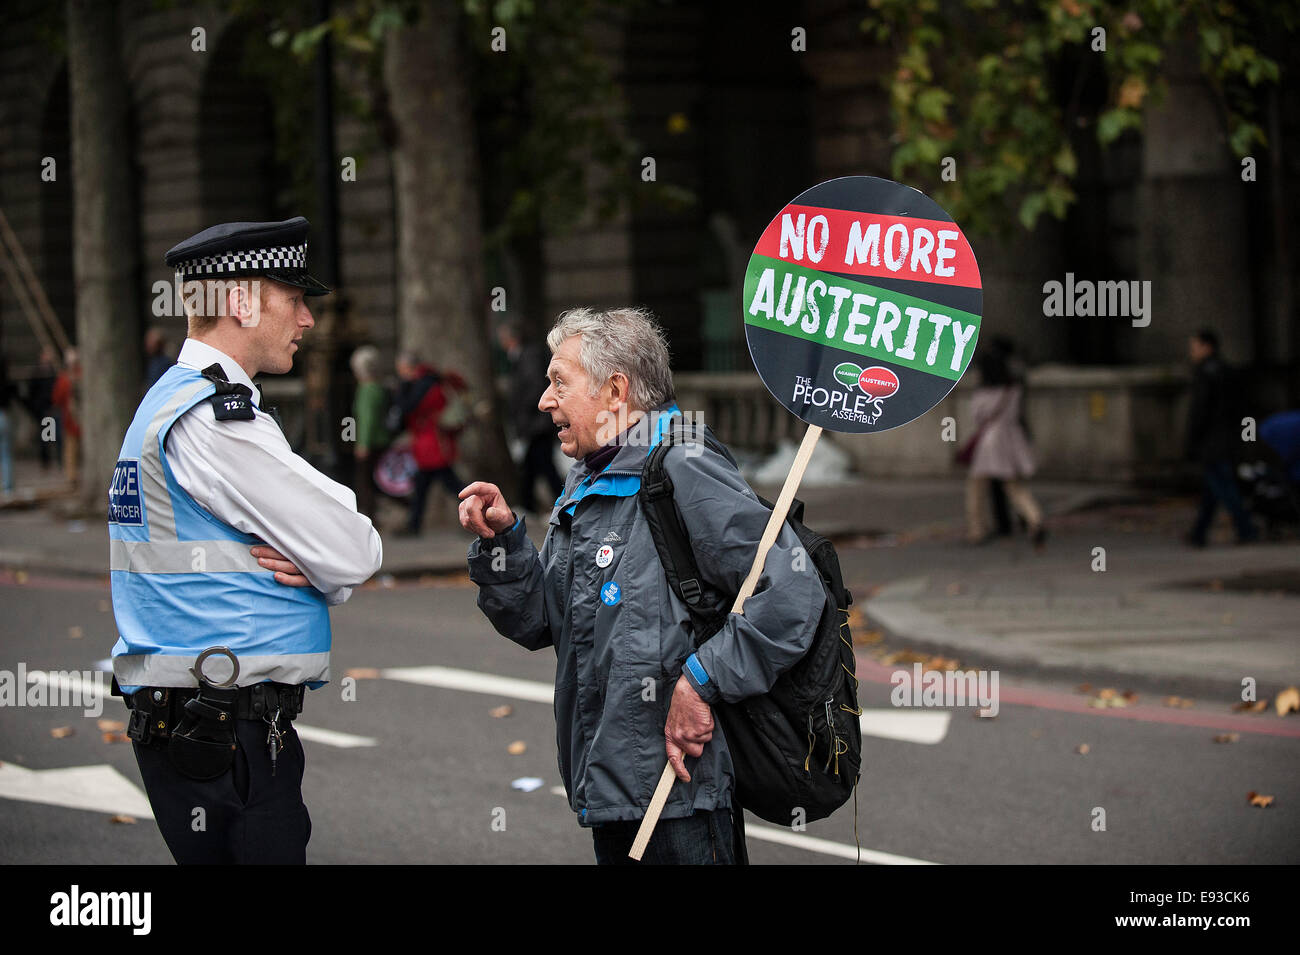 London, UK. 18 October 2014. 'Britain Needs A Payrise'   A TUC national demonstration in Central London.  A protester makes a point to a Police Liaison Officer as the march prepares to set off from the Embankment. Photo: Gordon Scammell/Alamy Live News Stock Photo